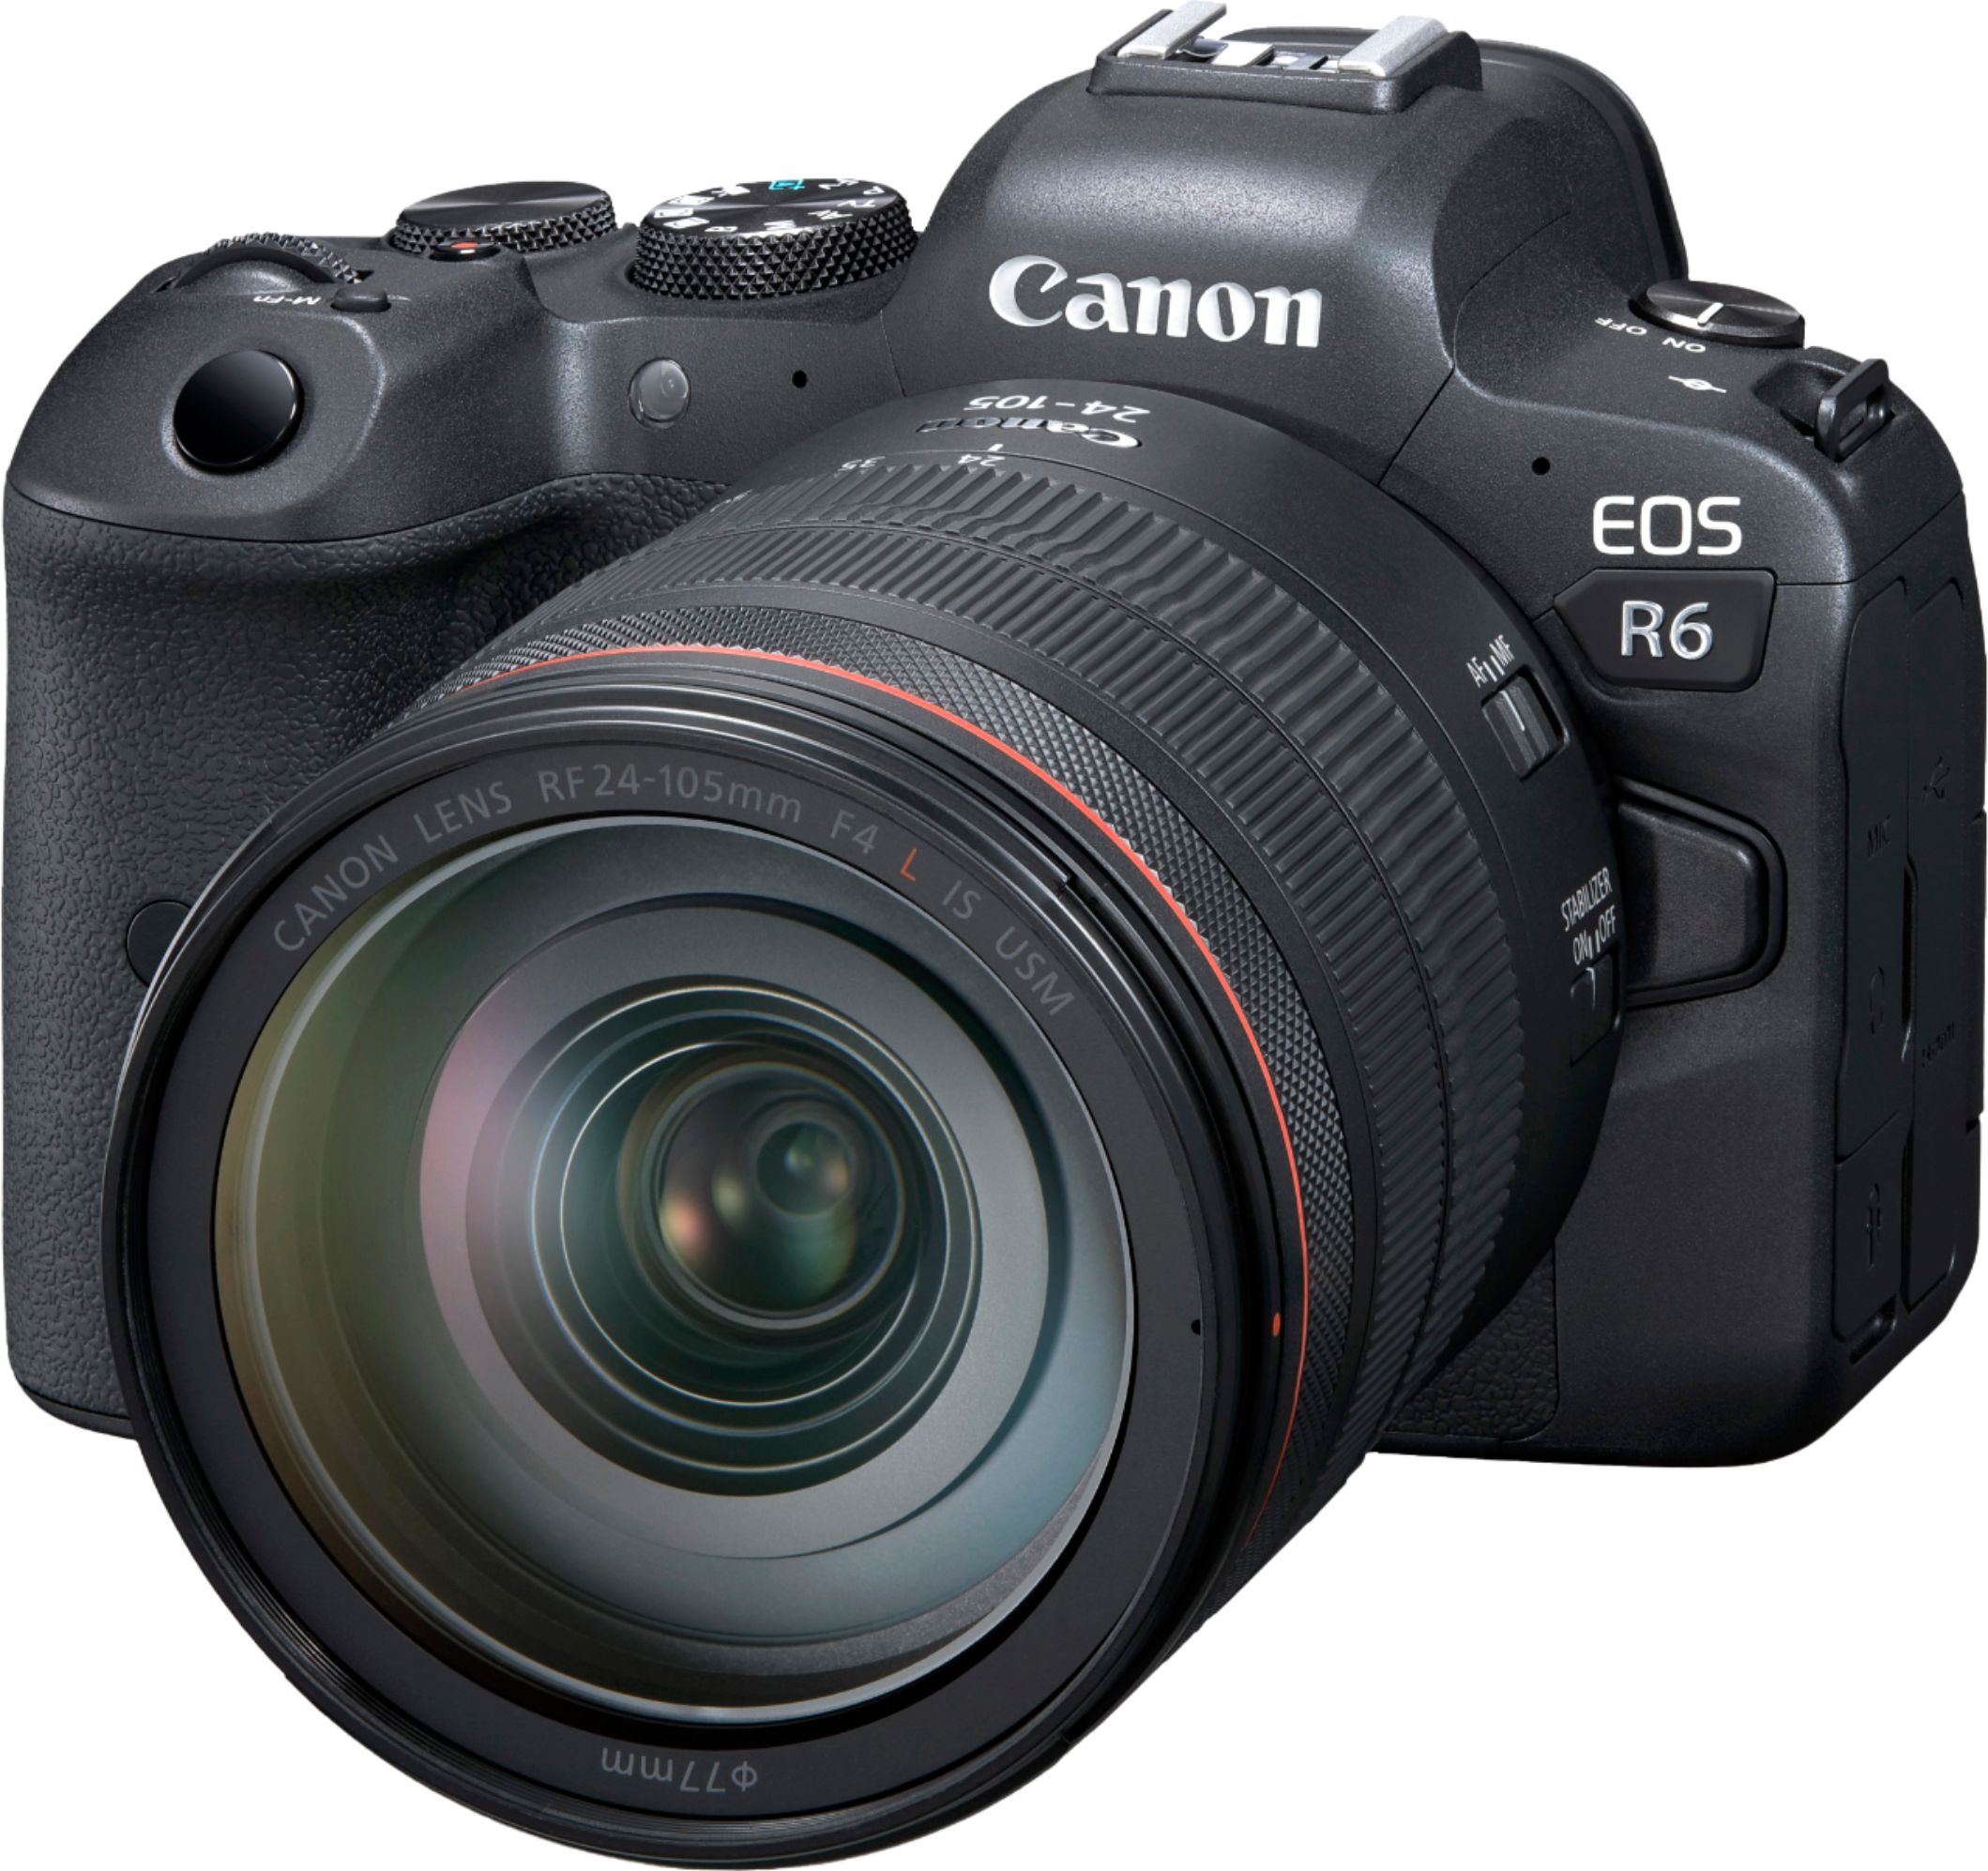 Canon EOS R6 Mirrorless Camera with RF 24-105mm f/4L IS USM Lens Black  4082C012 - Best Buy